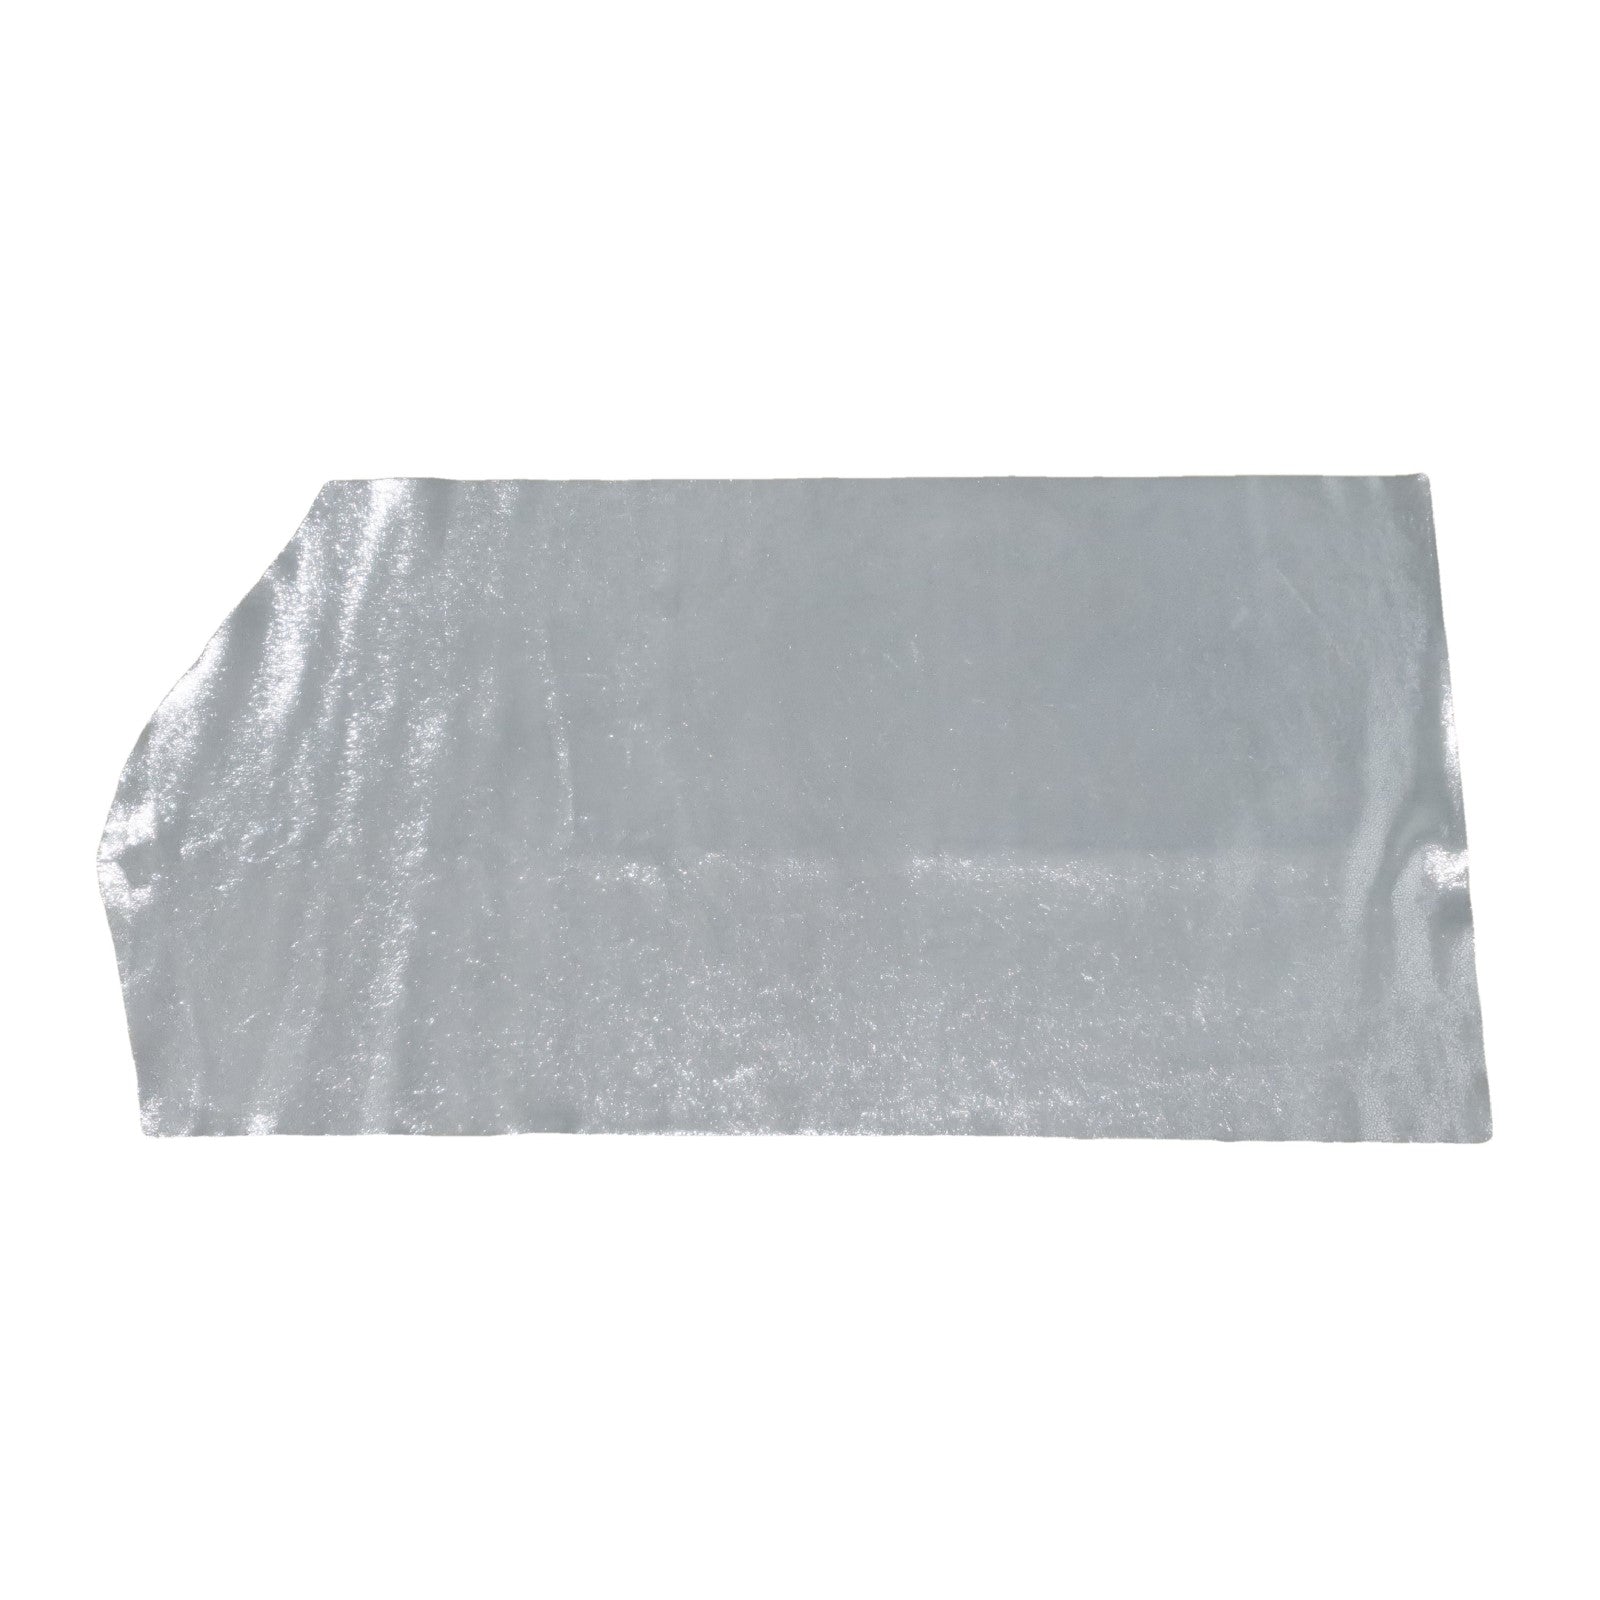 Metallic Silver Sizzling Stingray 2-3 oz Cow Hides, Middle Piece / 6.5-7.5 Sq Ft | The Leather Guy